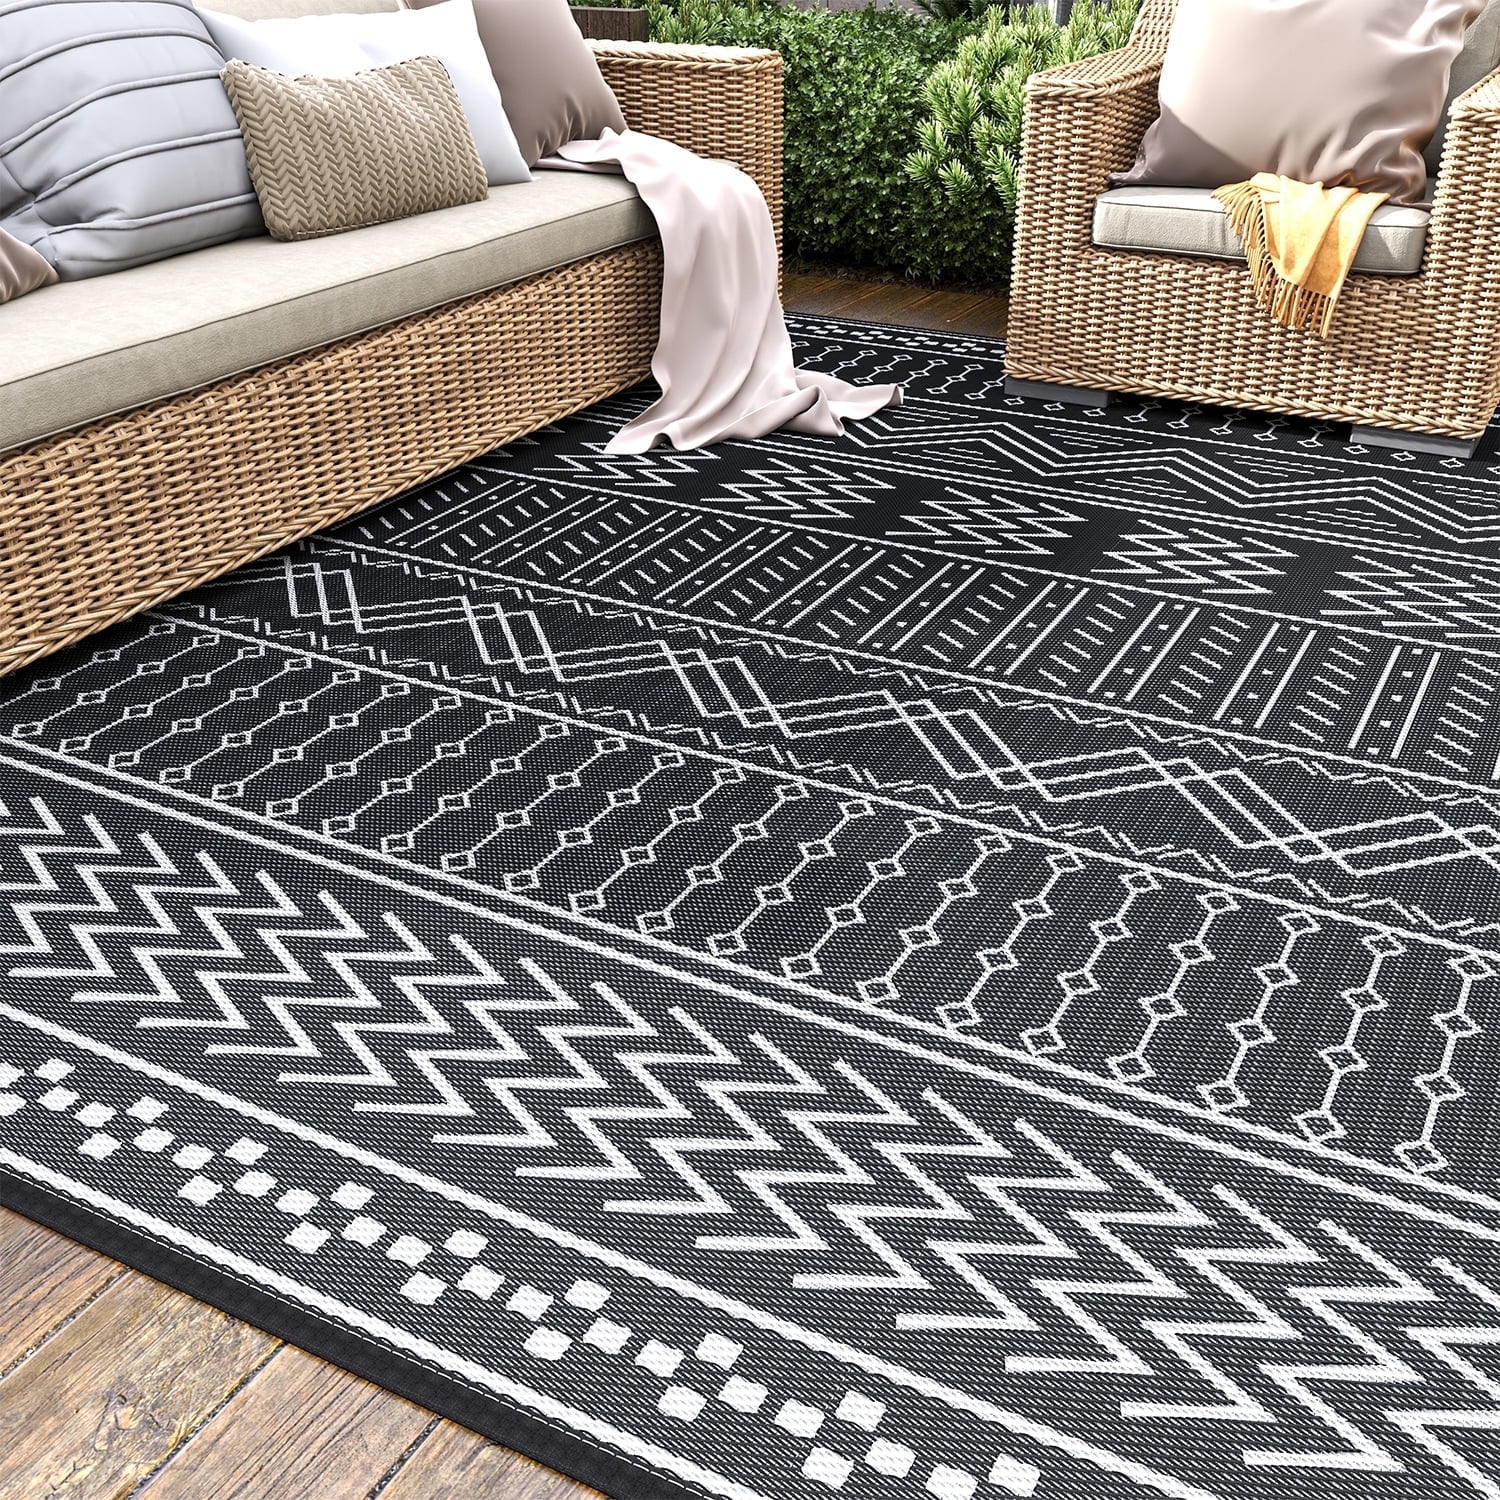 SIXHOME Outdoor Rug 5'x8' Waterproof Patio Rug Reversible Indoor Outdoor Rug Lightweight Plastic Straw Rug for RV Camping Deck Balcony Boho Porch Decor Black and White - image 4 of 10